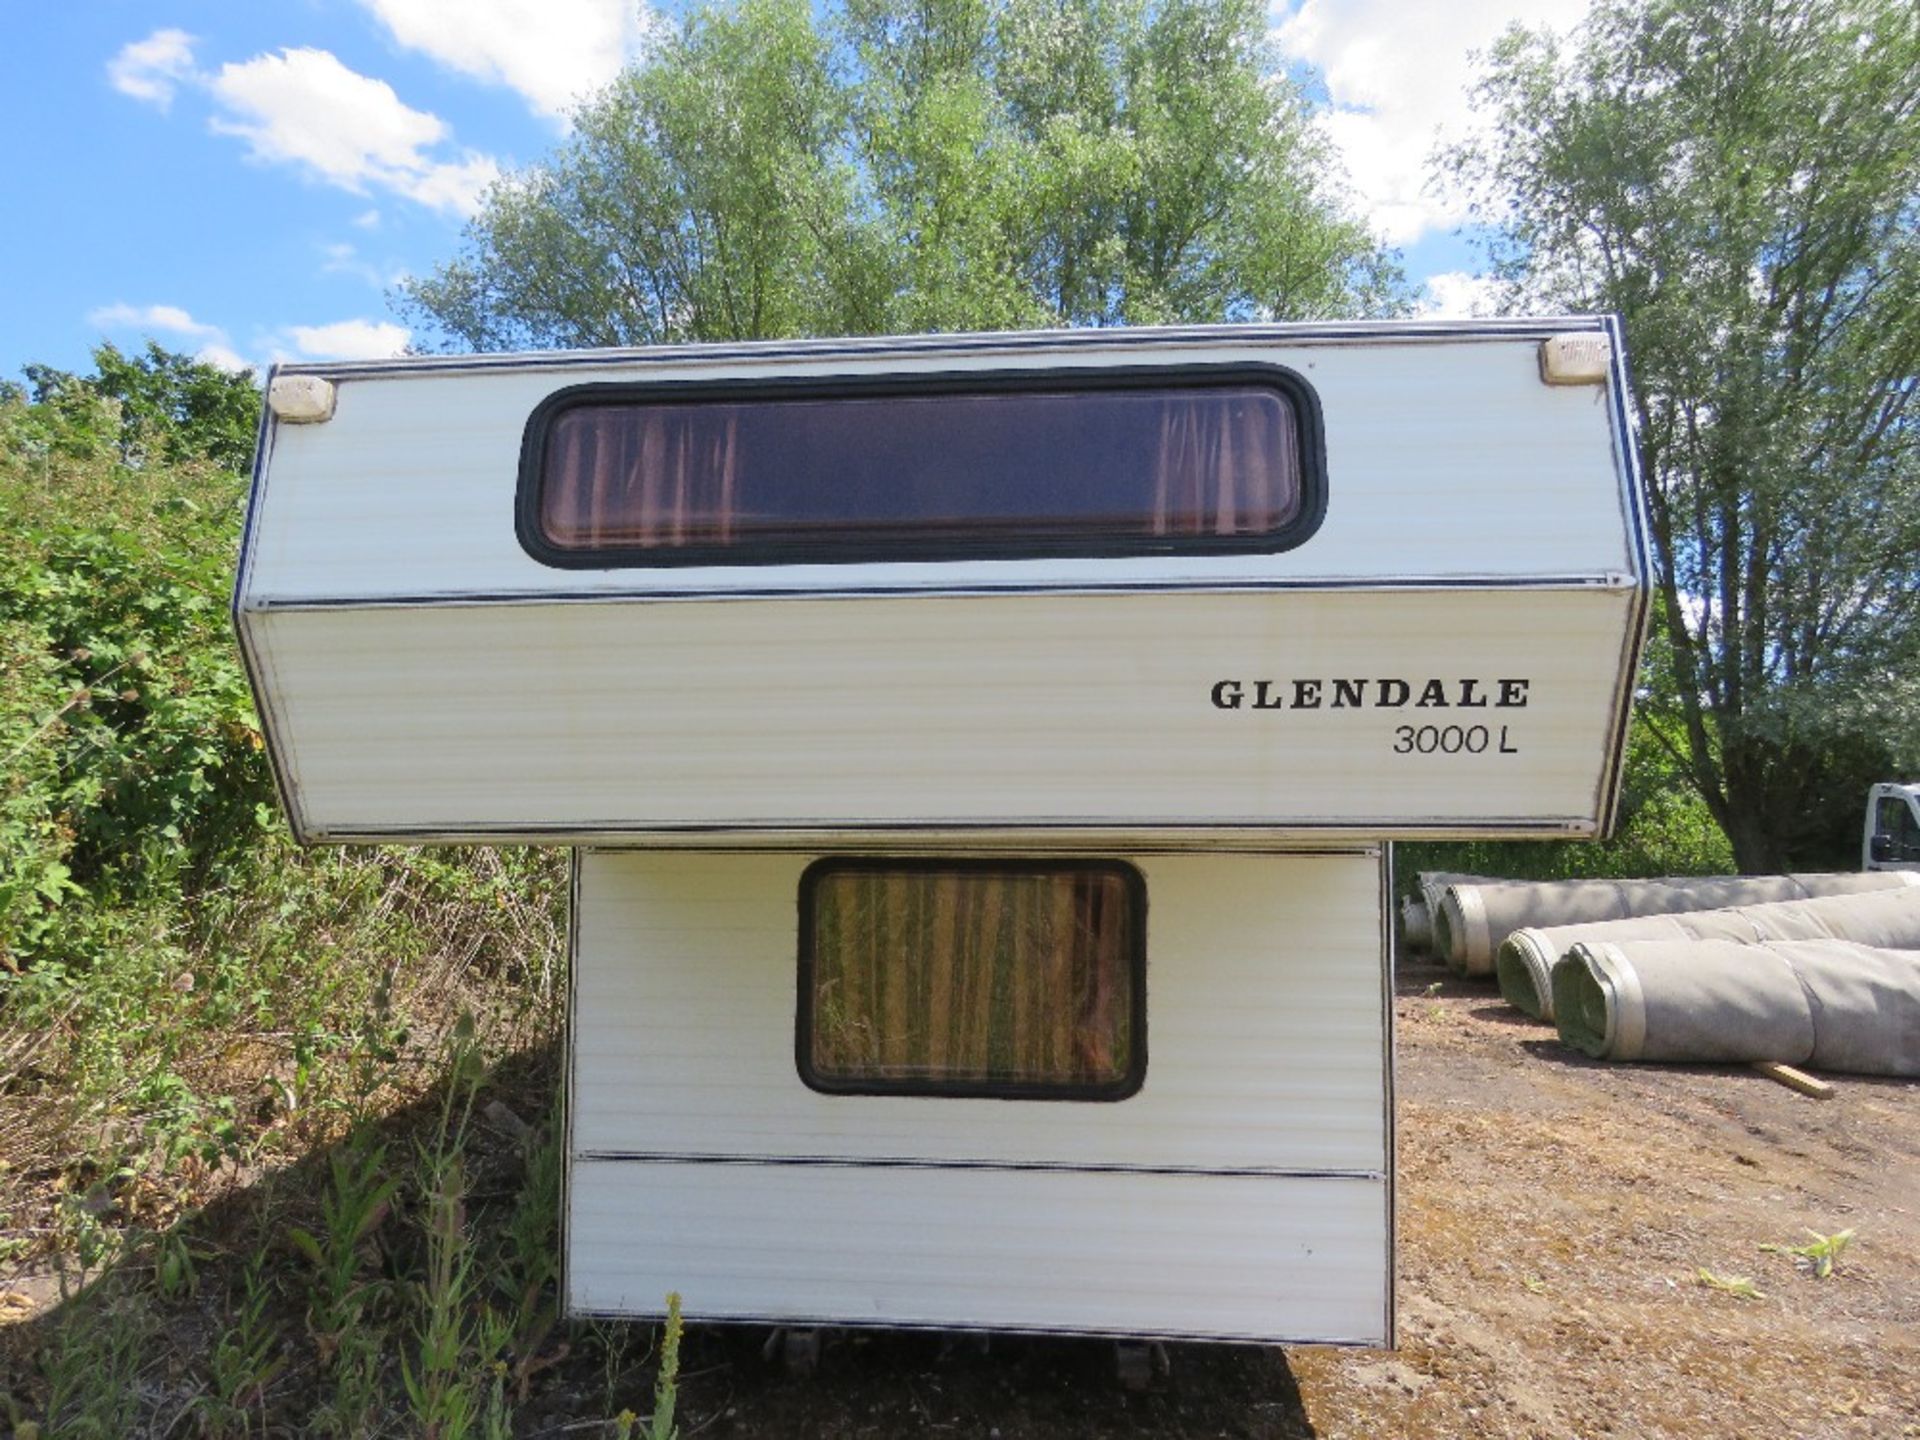 GLENDALE DEMOUNTABLE CAMPER, 14FT X 7FT BASE APPROX PLUS A LUTON POD. NO VAT ON THE HAMMER PRICE O - Image 2 of 11